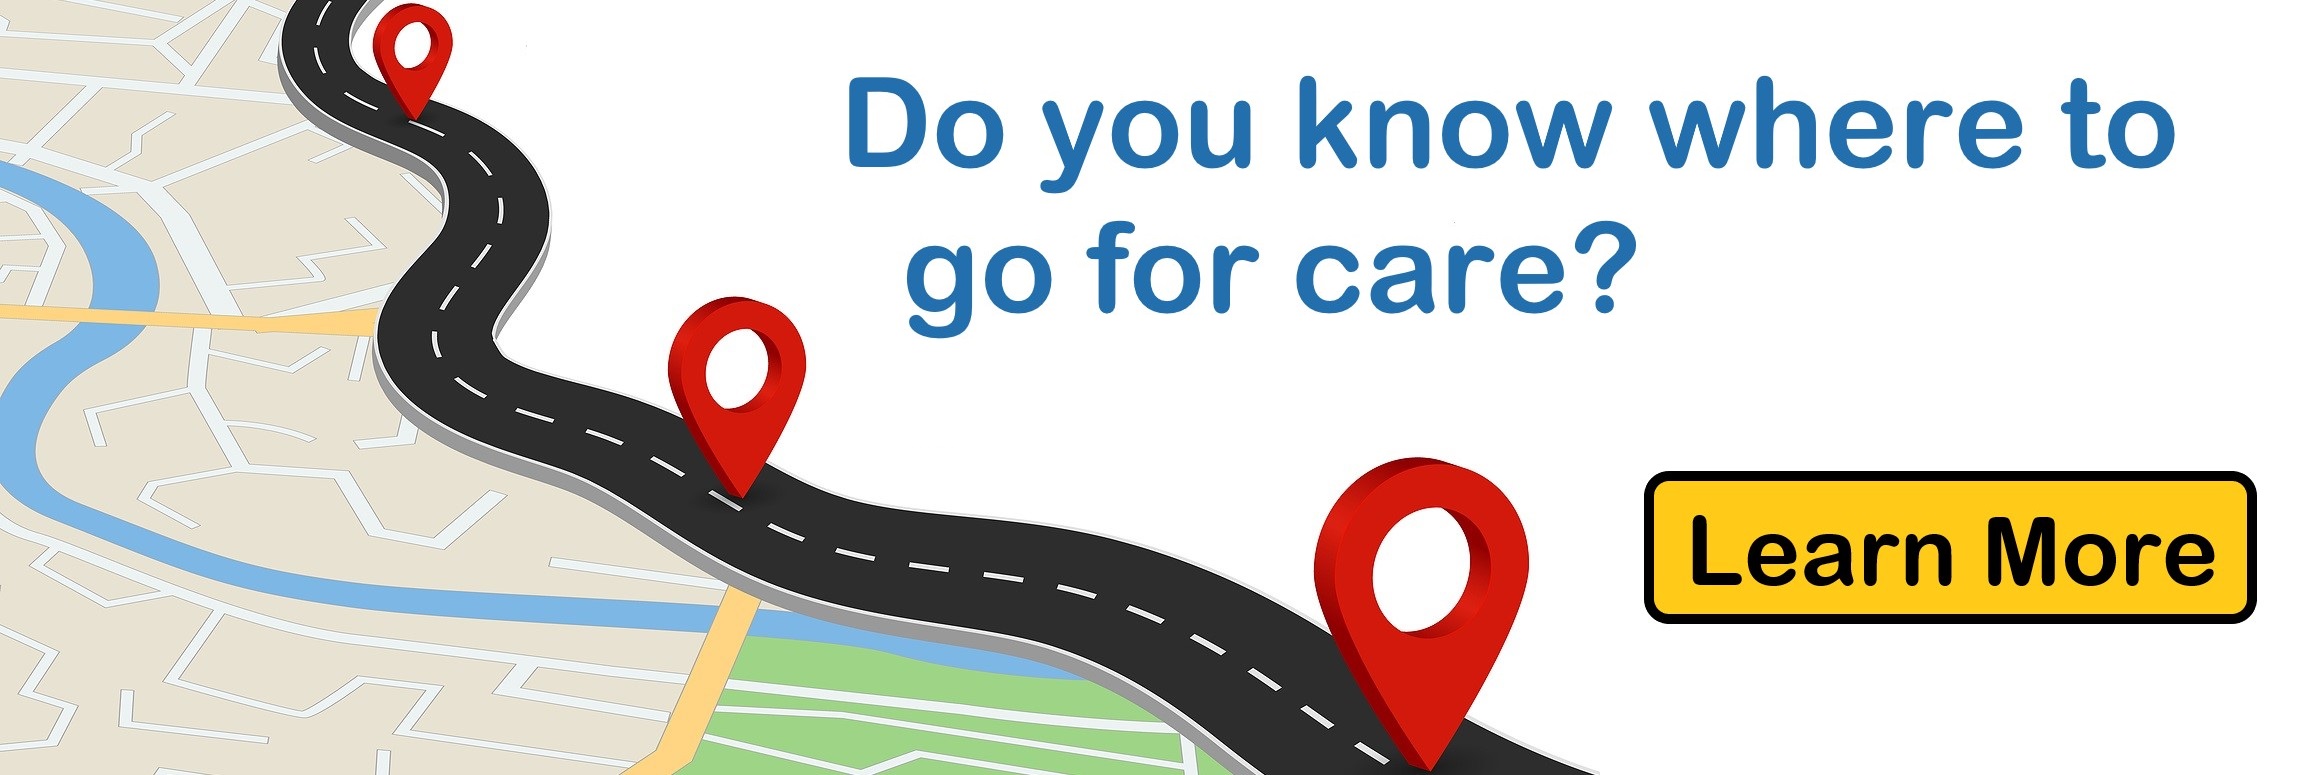 Do you know where to go for care - Choose the Right Care